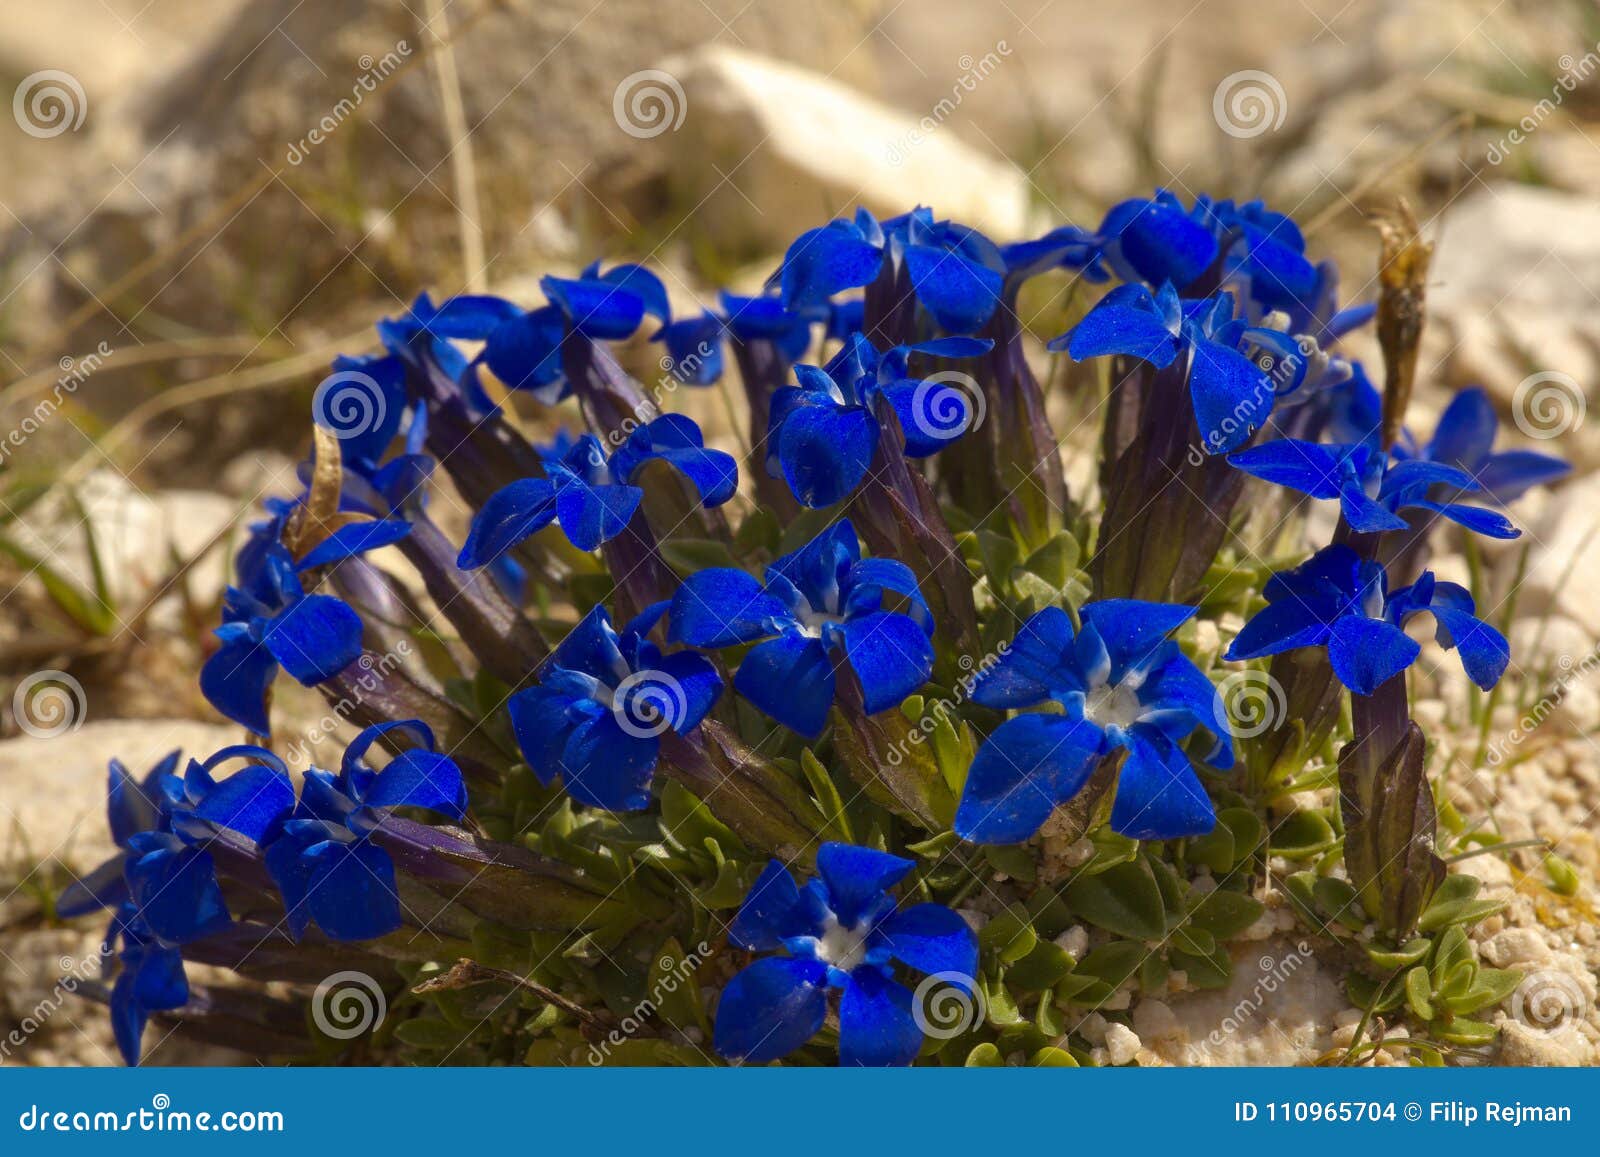 detailed view of a blue gentian